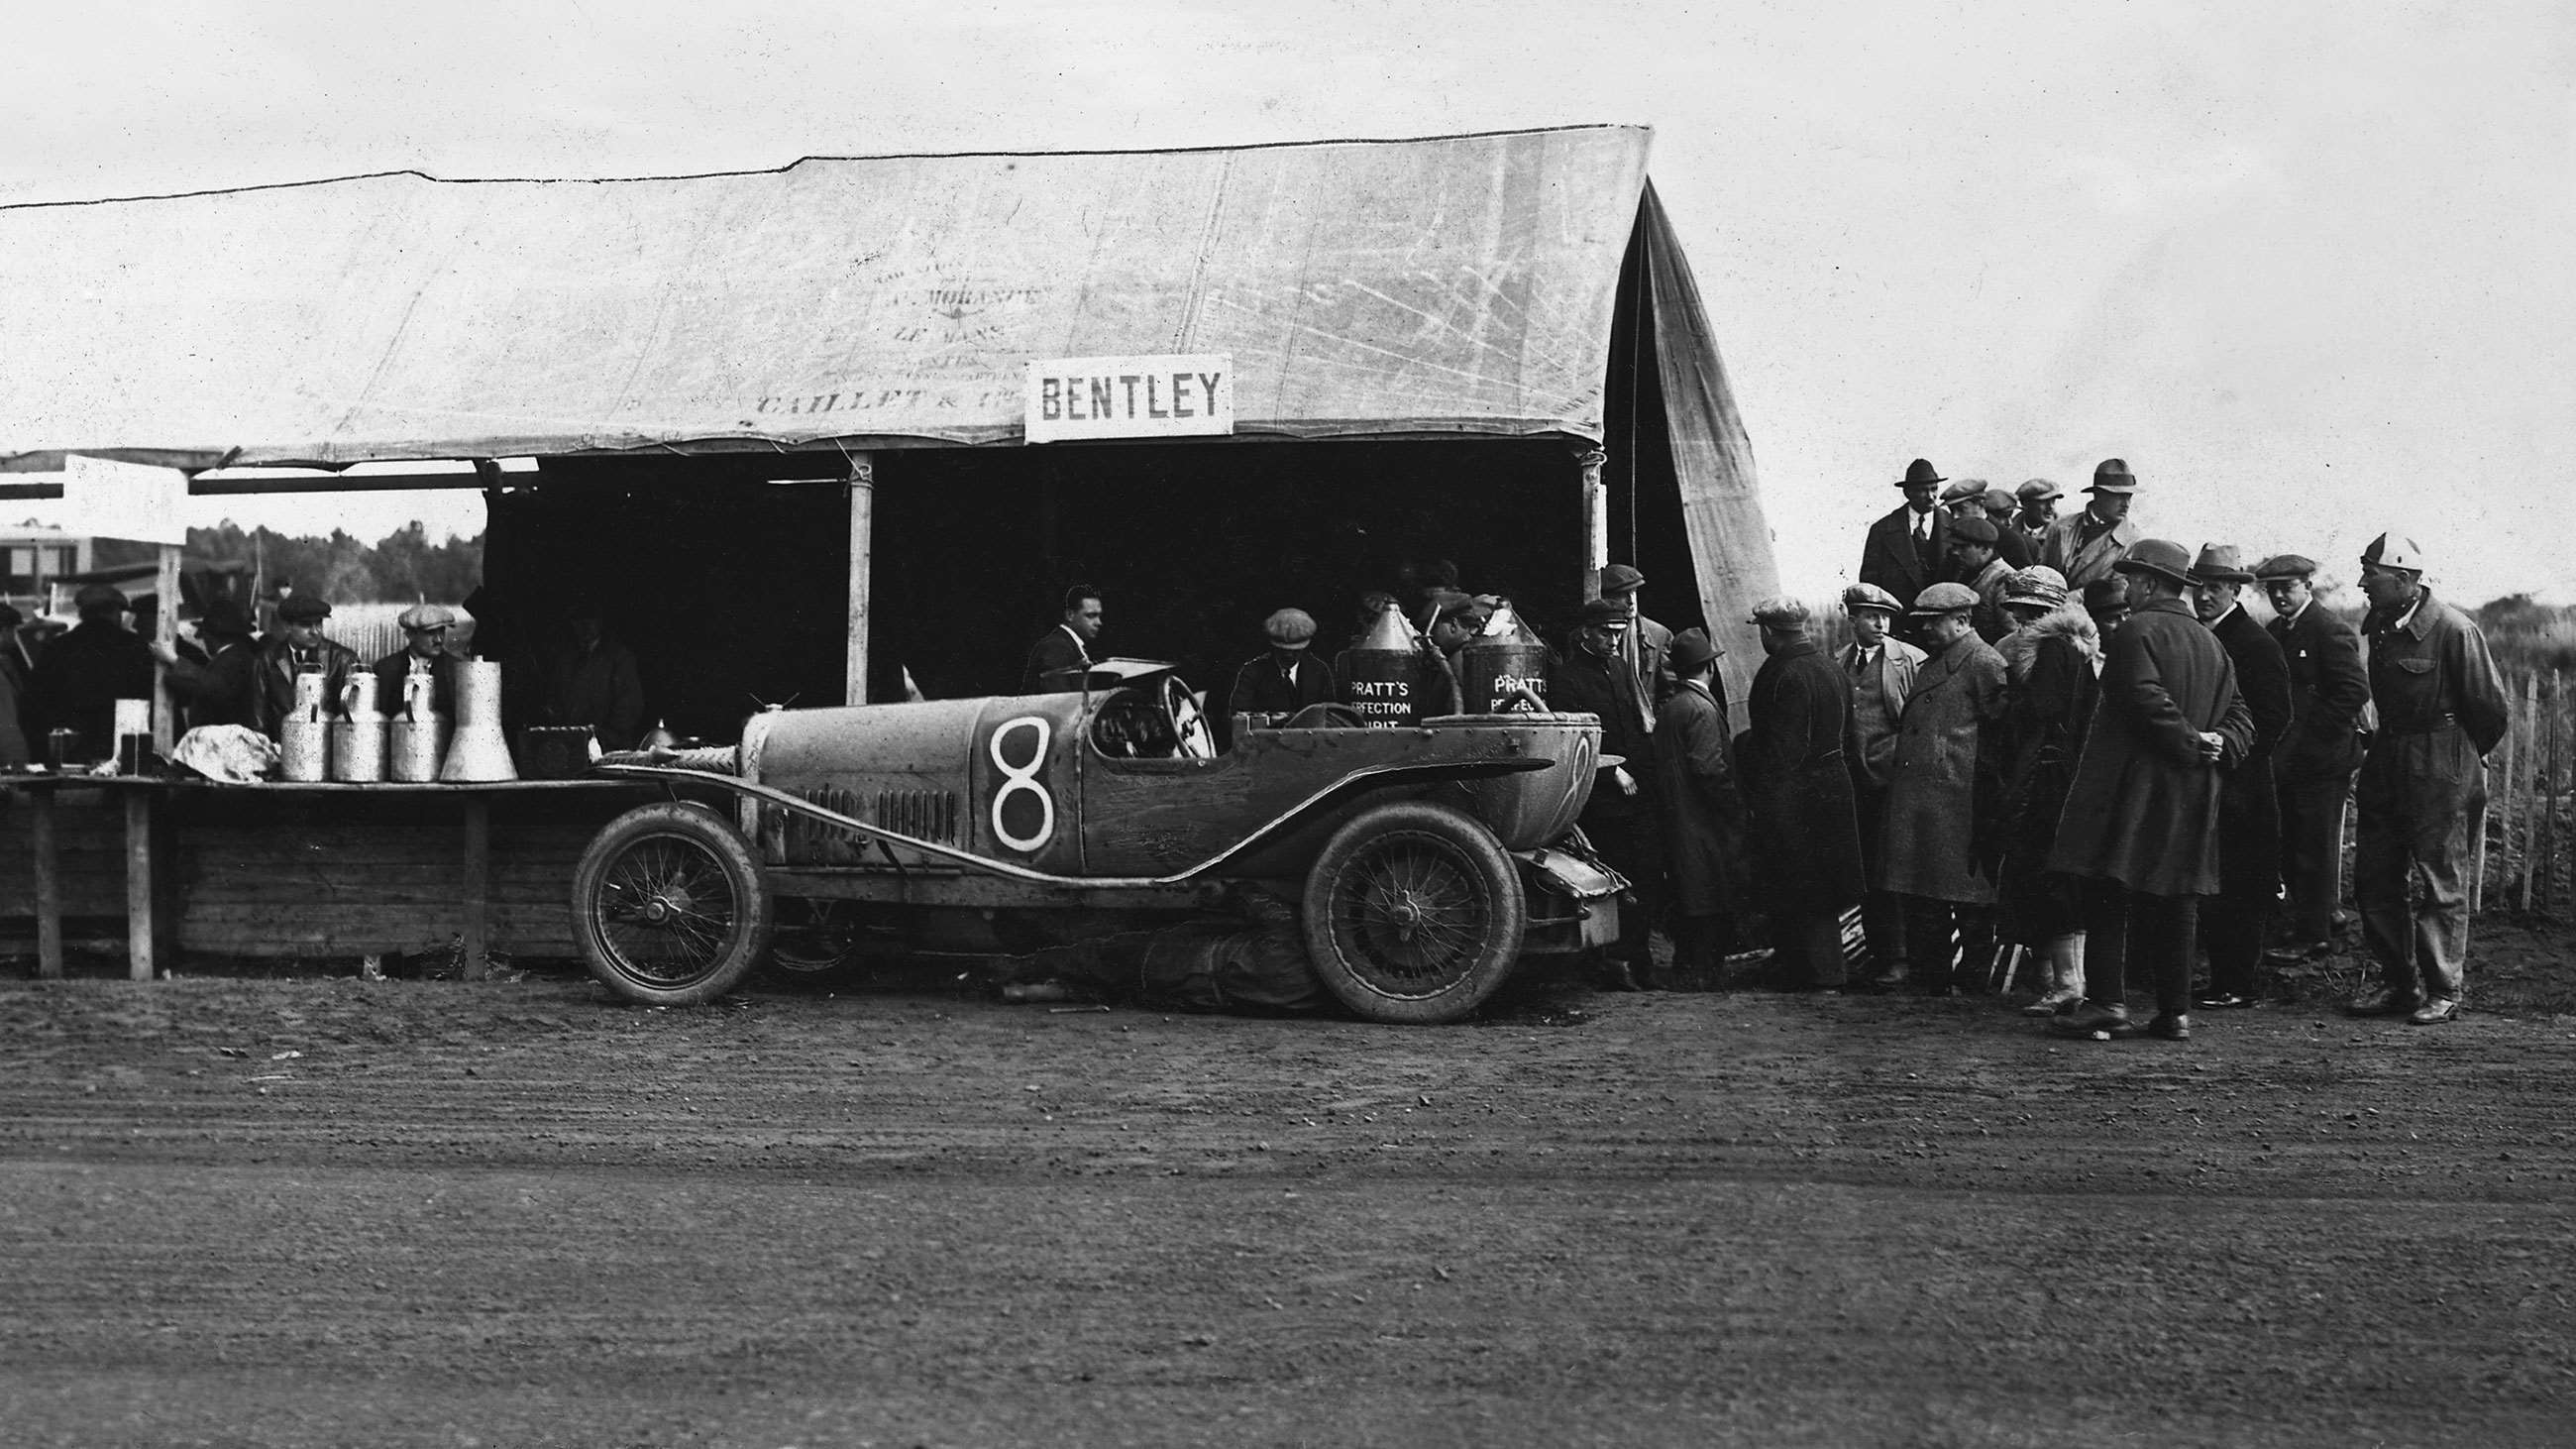 Le Mans, 1923, and the Bentley 3.0-litre Sport of John Duff and Frank Clement. 